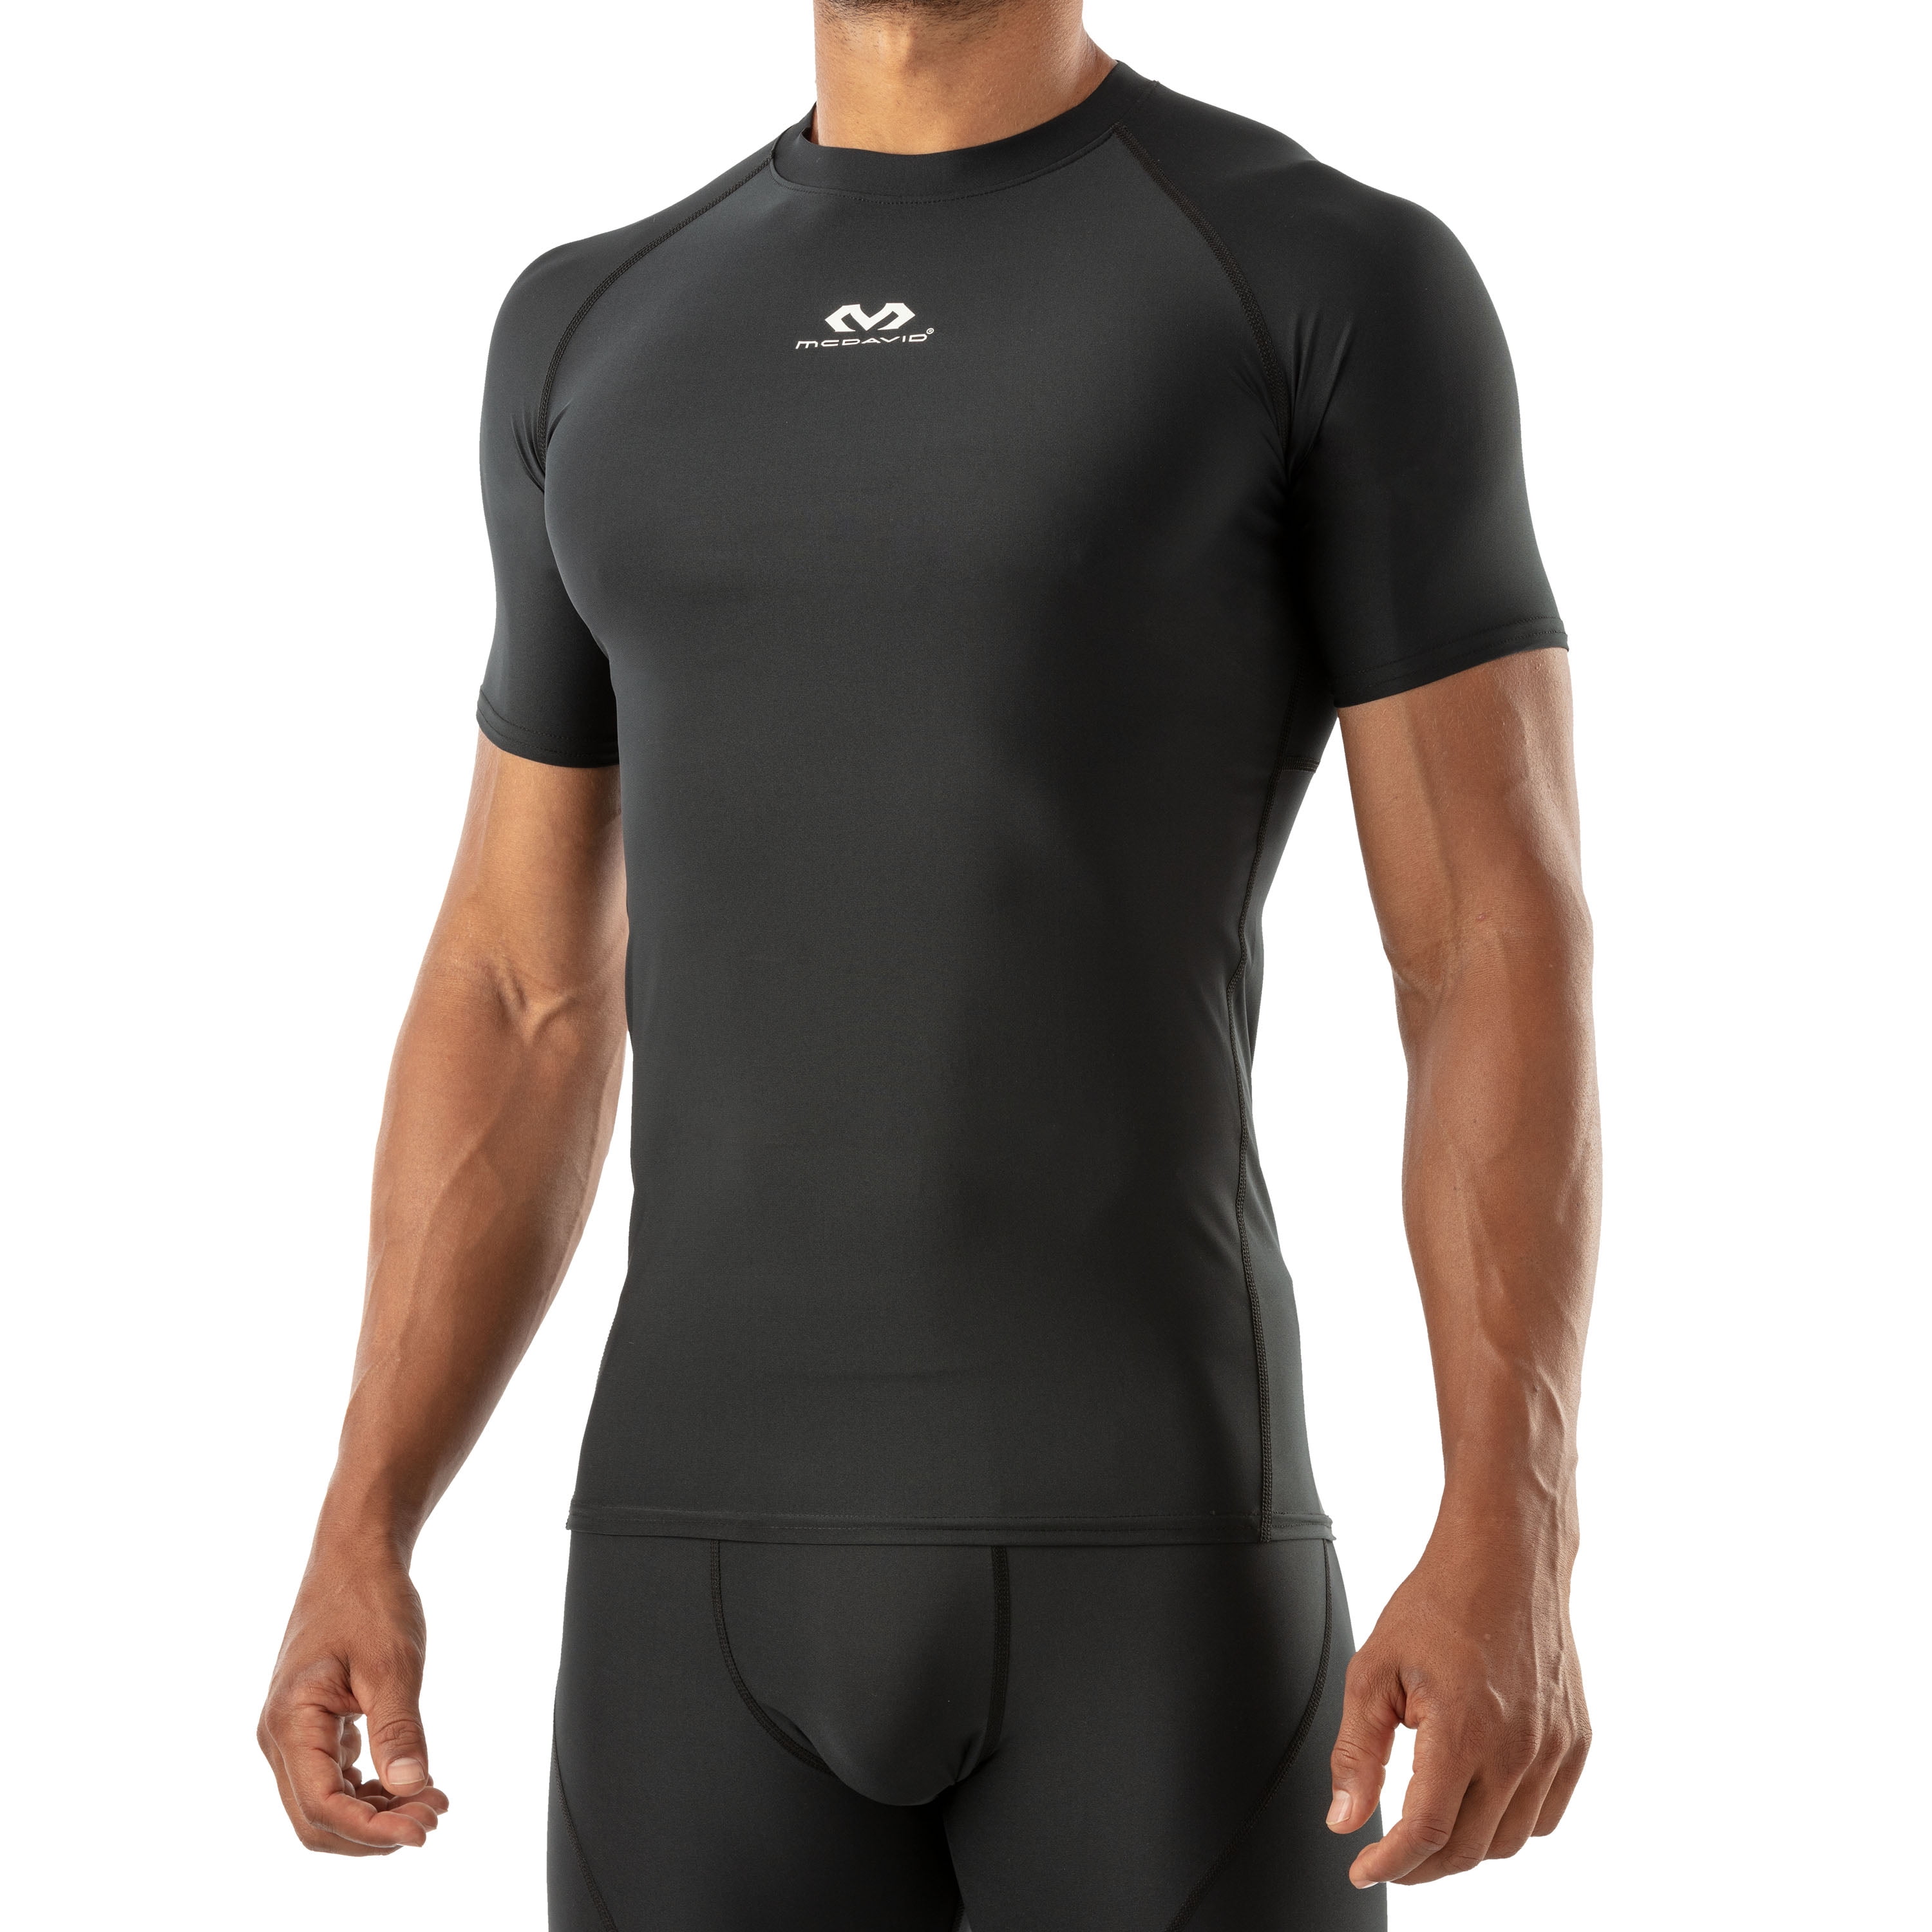 McDavid Sport Compression Shirt With Short Sleeves, Black, Adult X-Large 